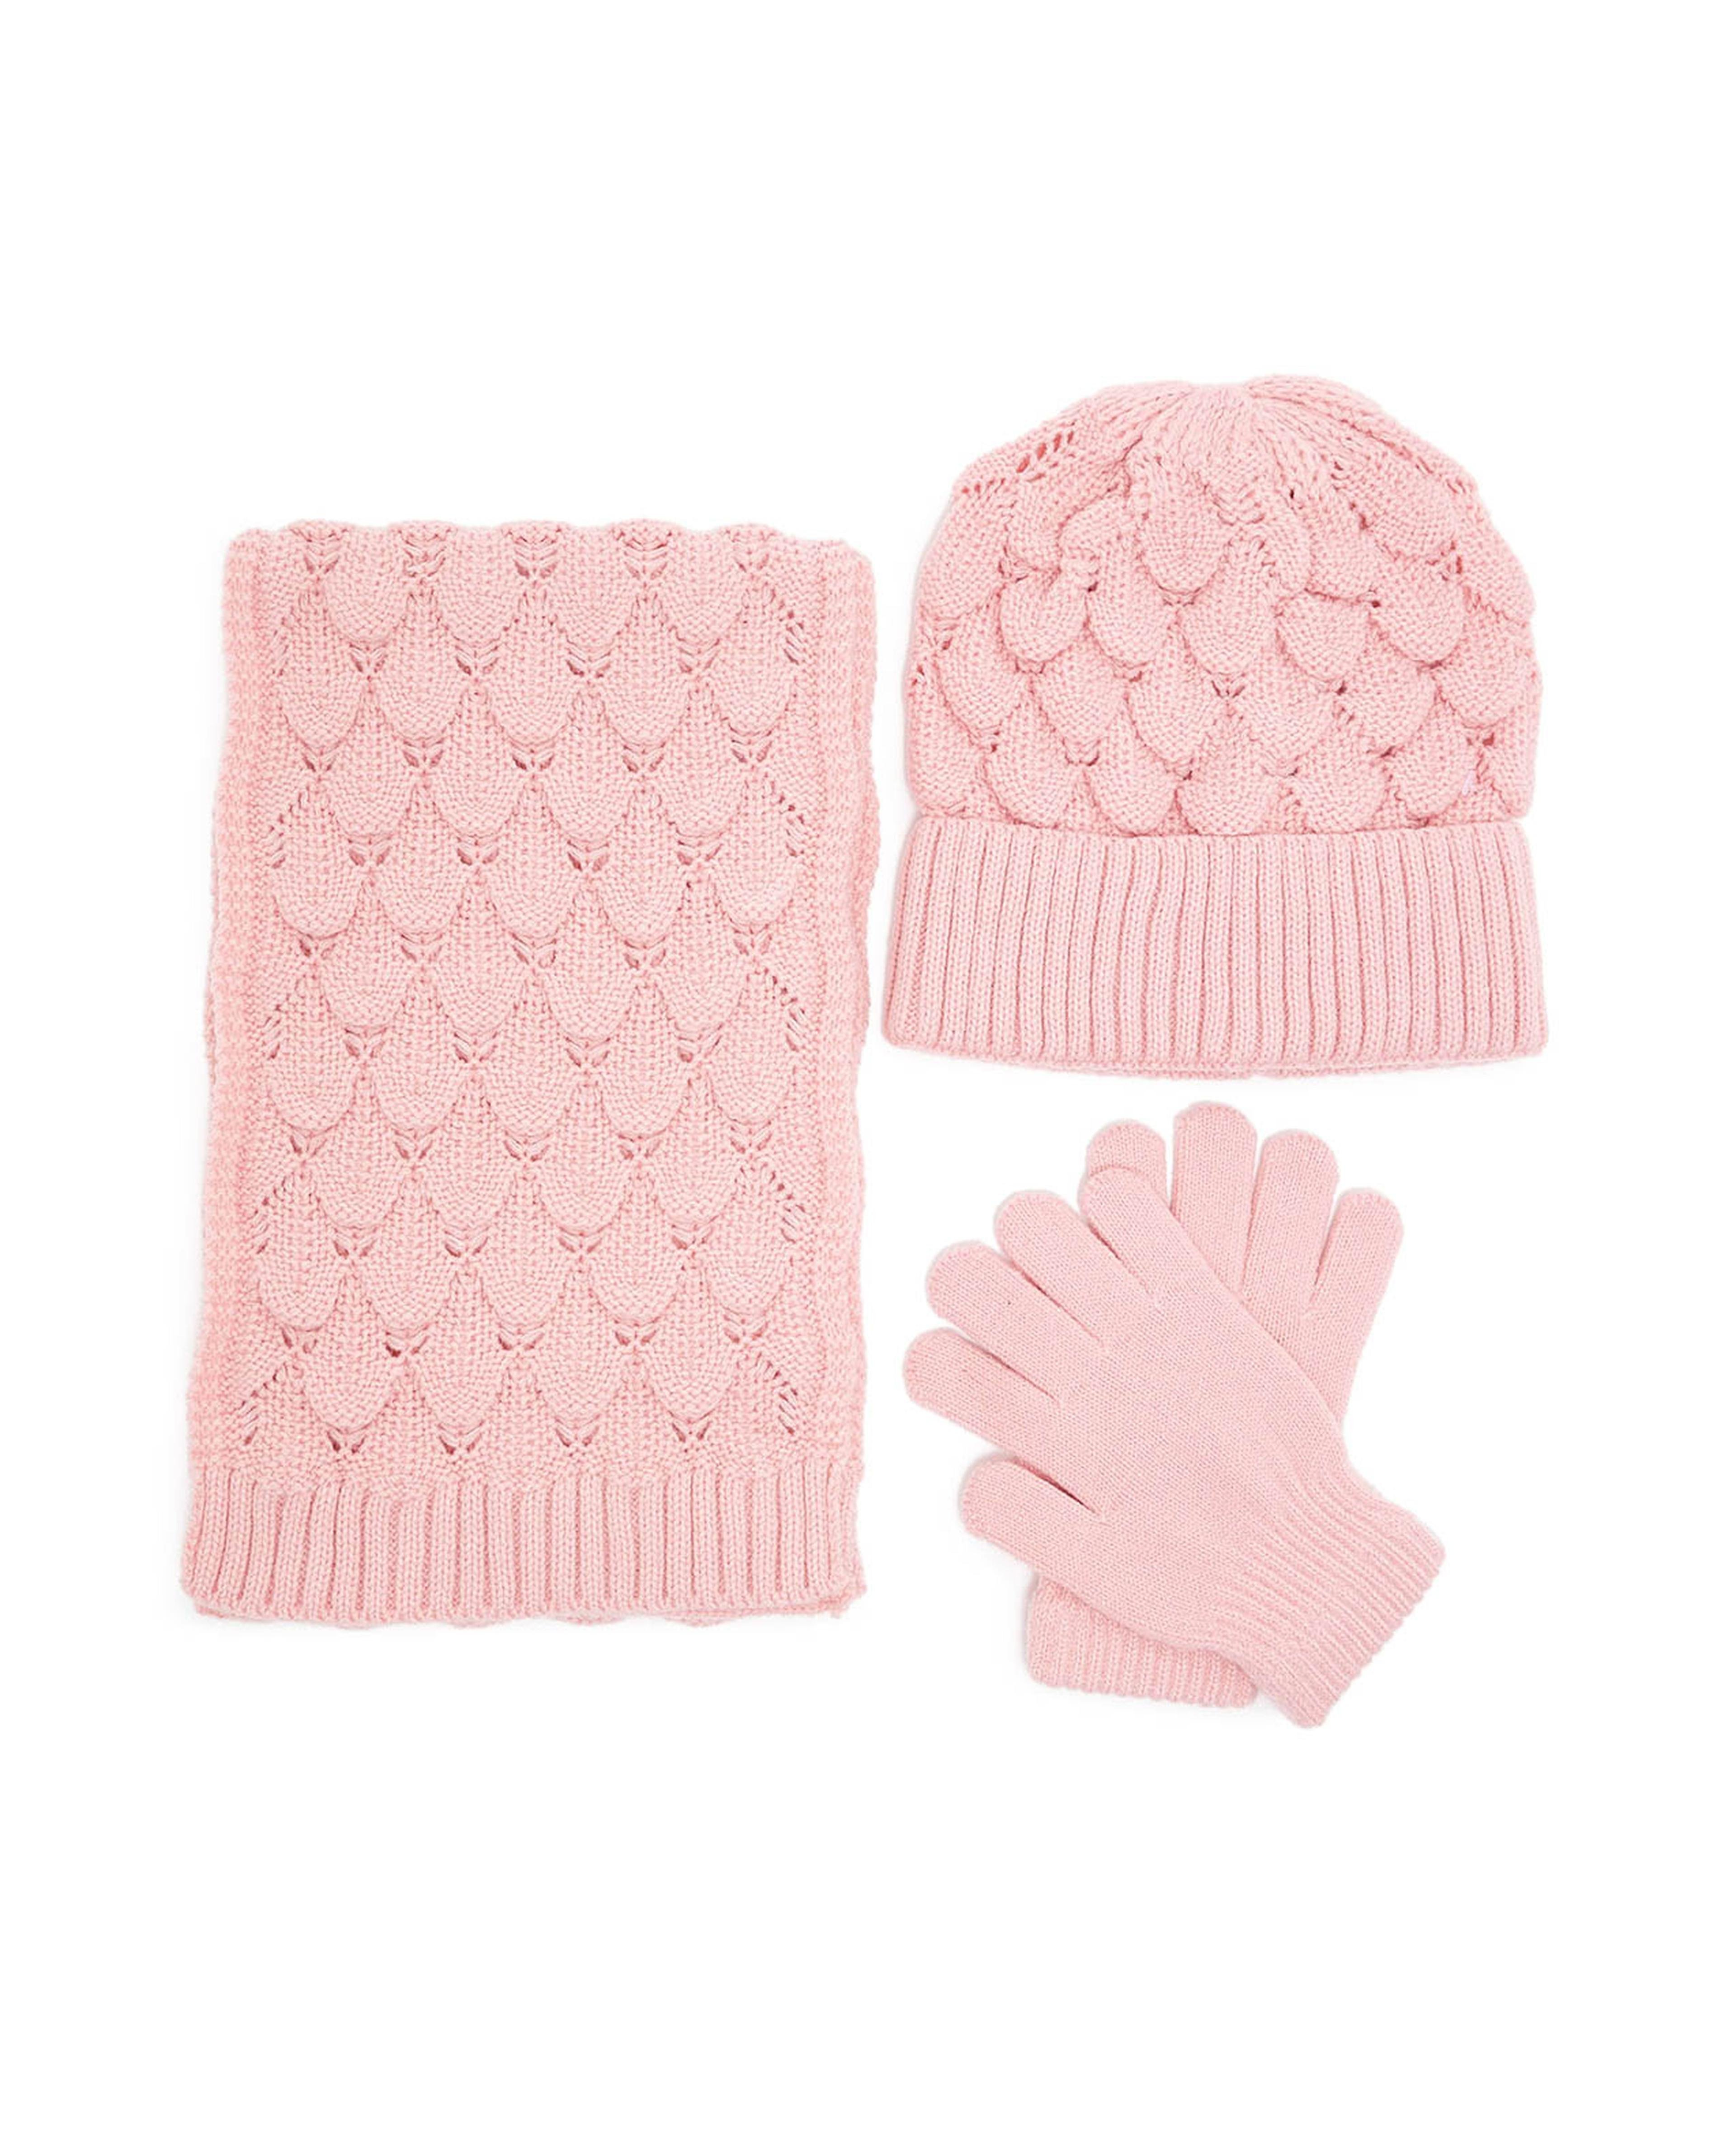 Feather Lace Knit Cap, Gloves and Muffler Set